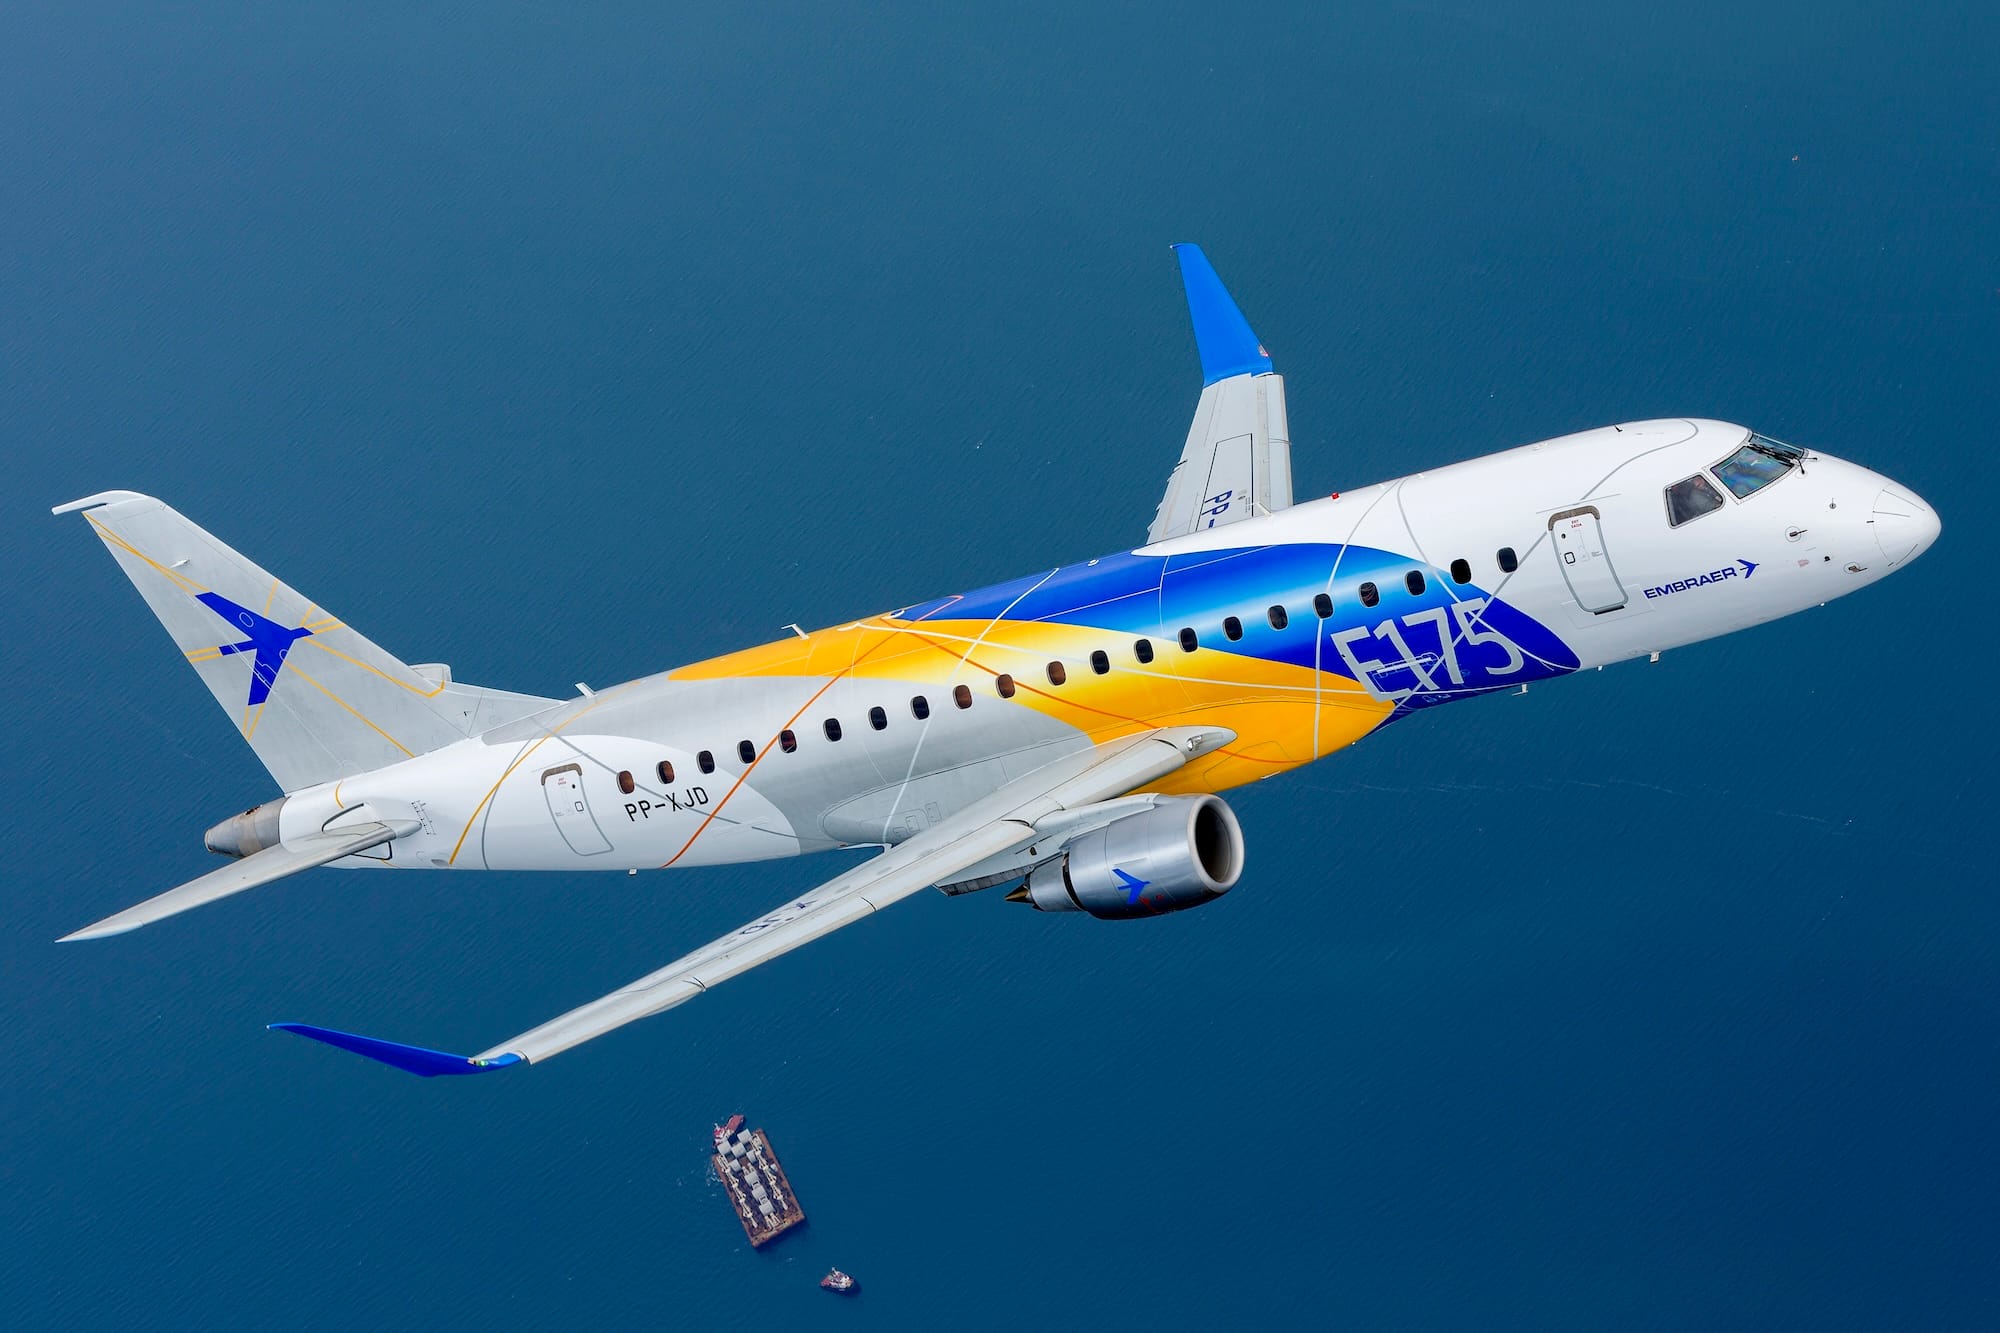 AVIAN Inventory Management partners with Azorra to acquire 2x Embraer ERJ-100LRs from lessor